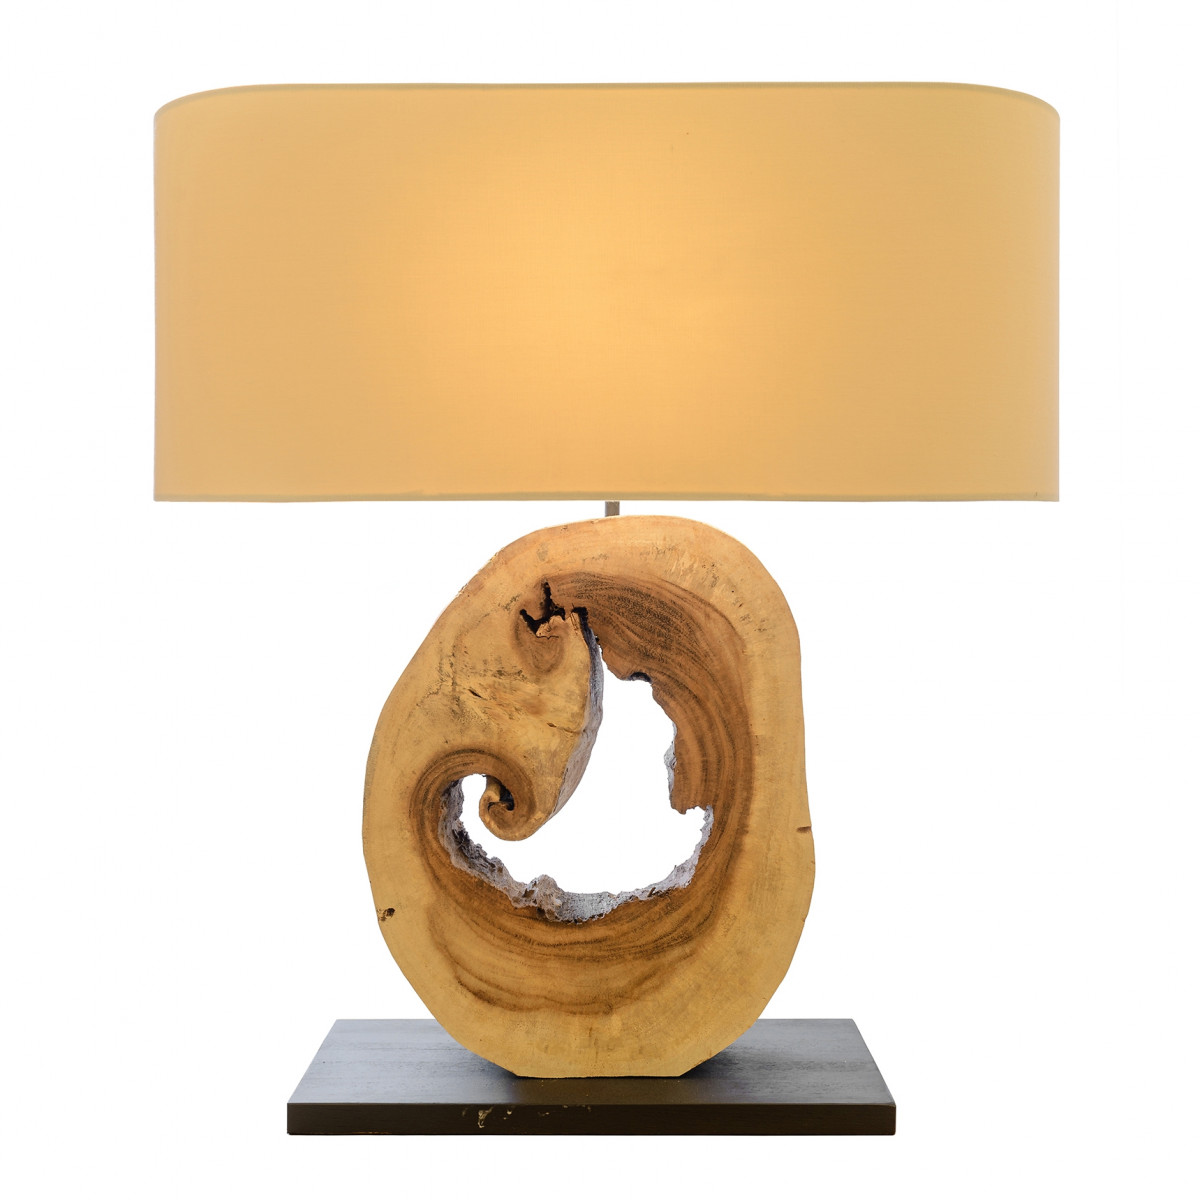 Shop Kerr Table Lamp, Small from DiMare Design on Openhaus